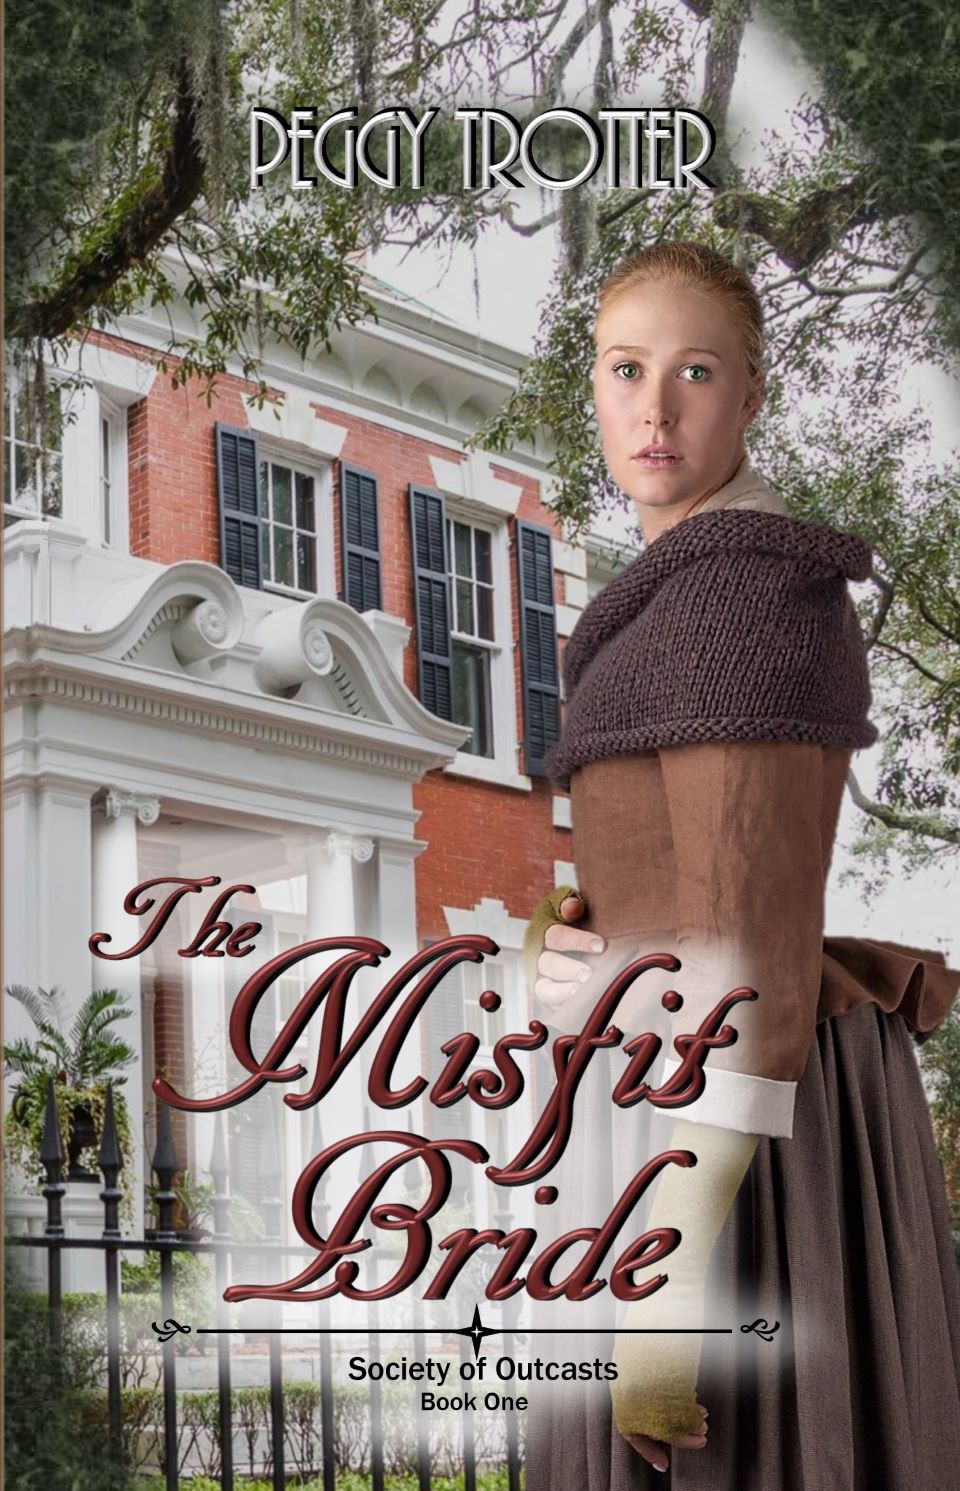 The Misfit Bride by Peggy Trotter